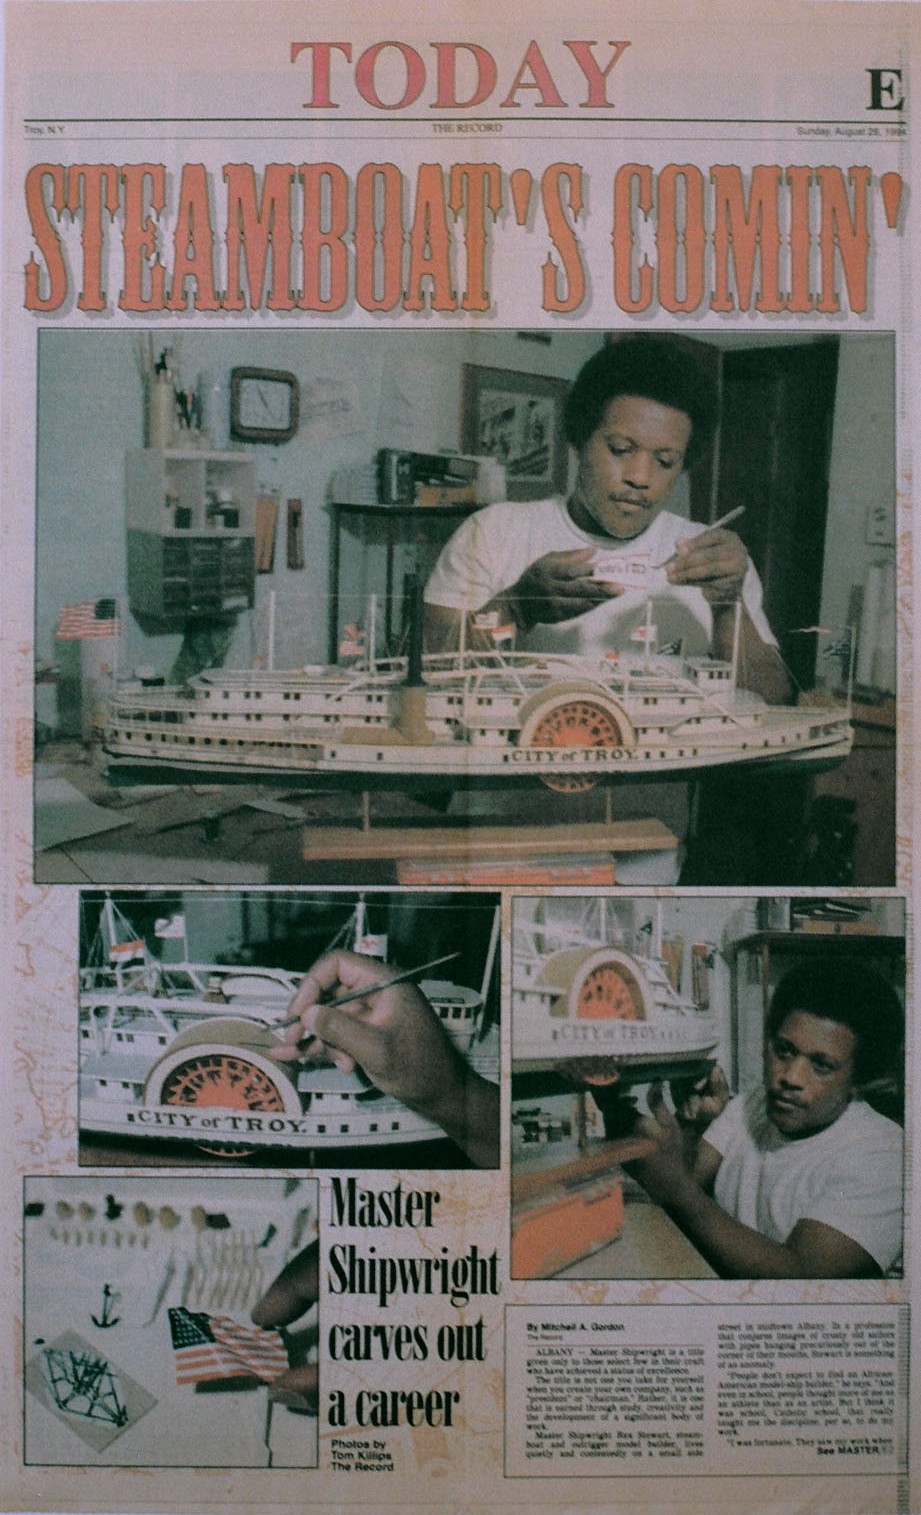 Hudson River Model Steamboats: Building The Model -Nightboat CITY OF 